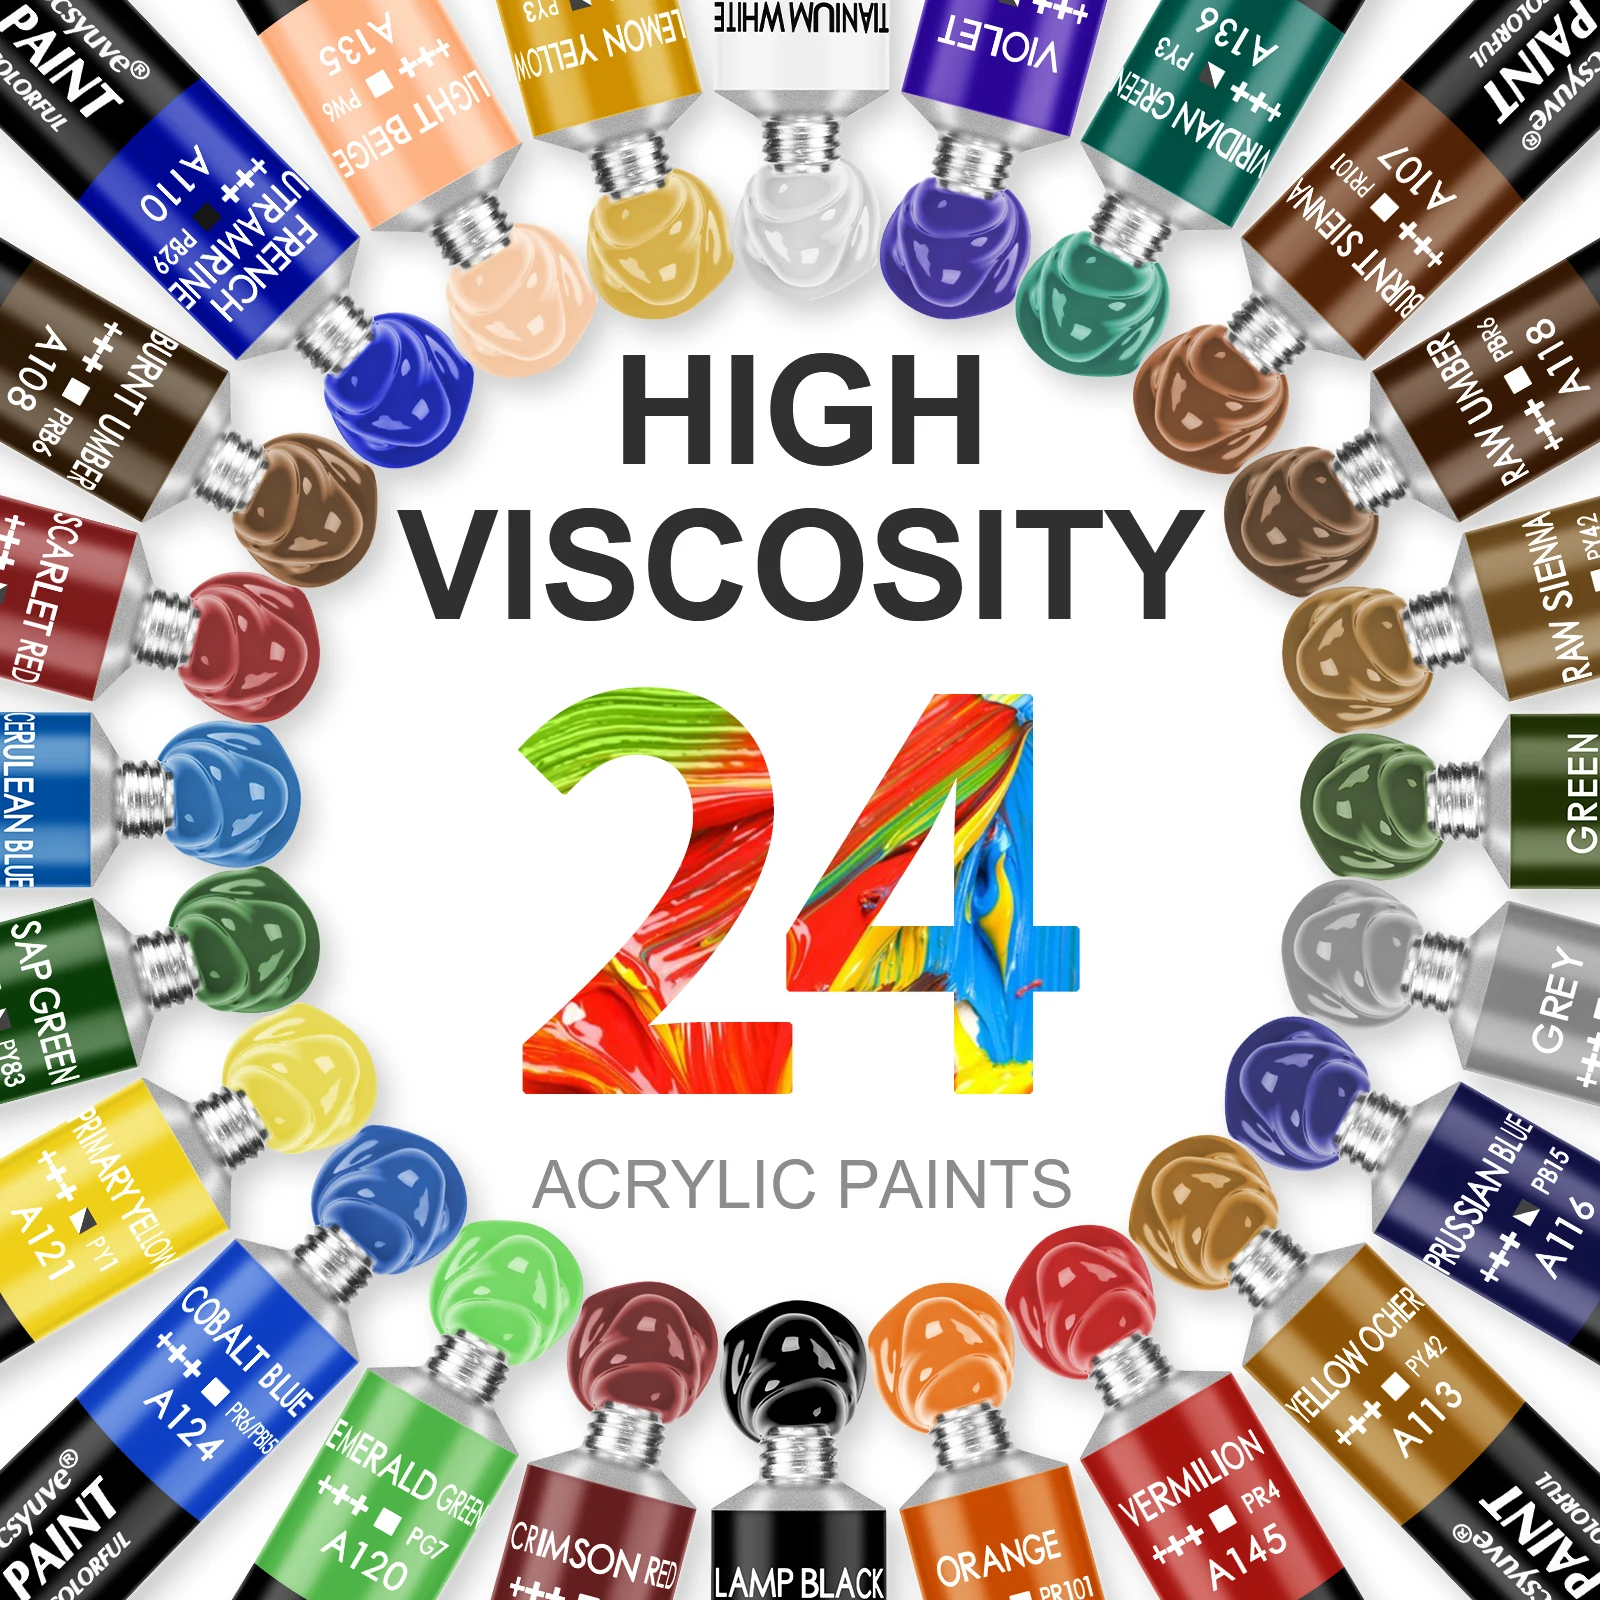 

Acrylic Paint Set,24 Colors 22ML Art Craft Paints for Professional Artists Kids Students Beginners,Hand Painted Wall Paint DIY